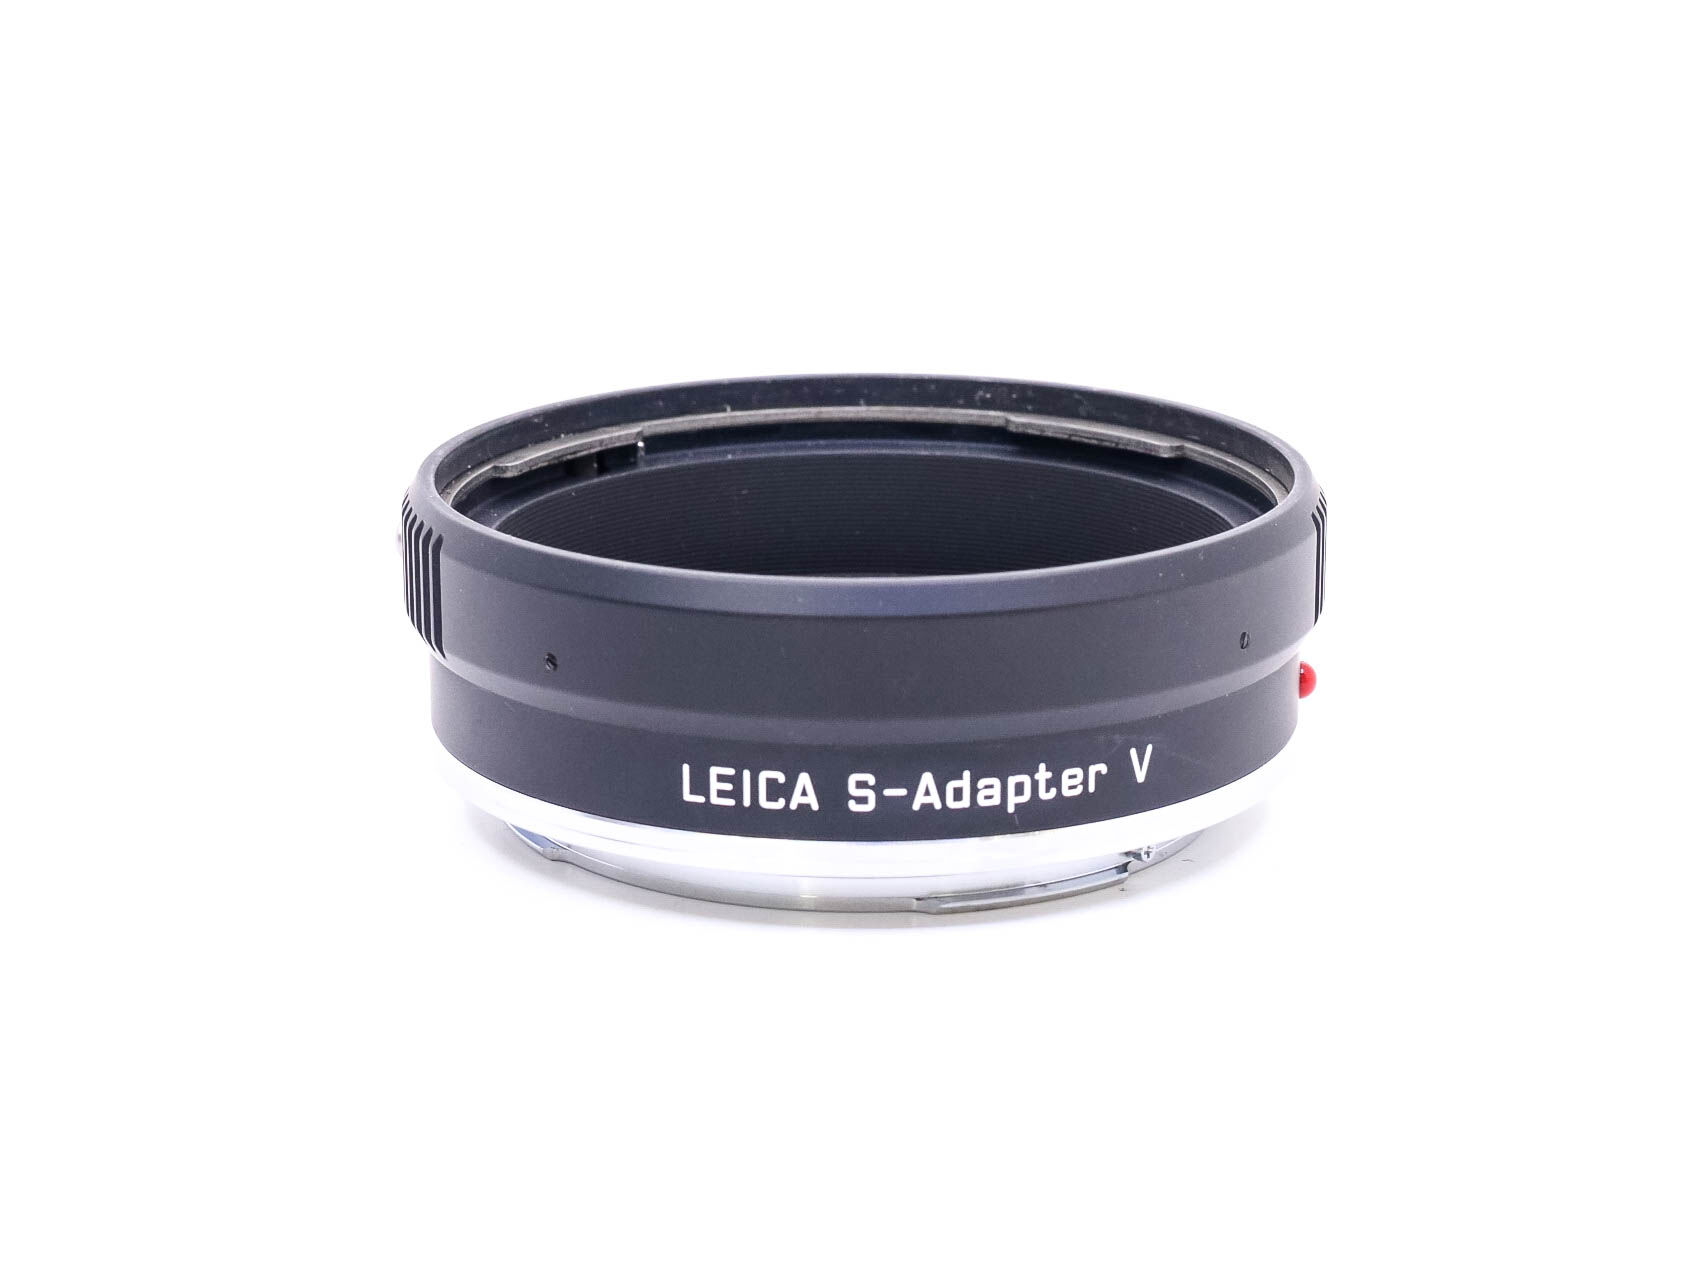 leica s-adapter v (condition: excellent)